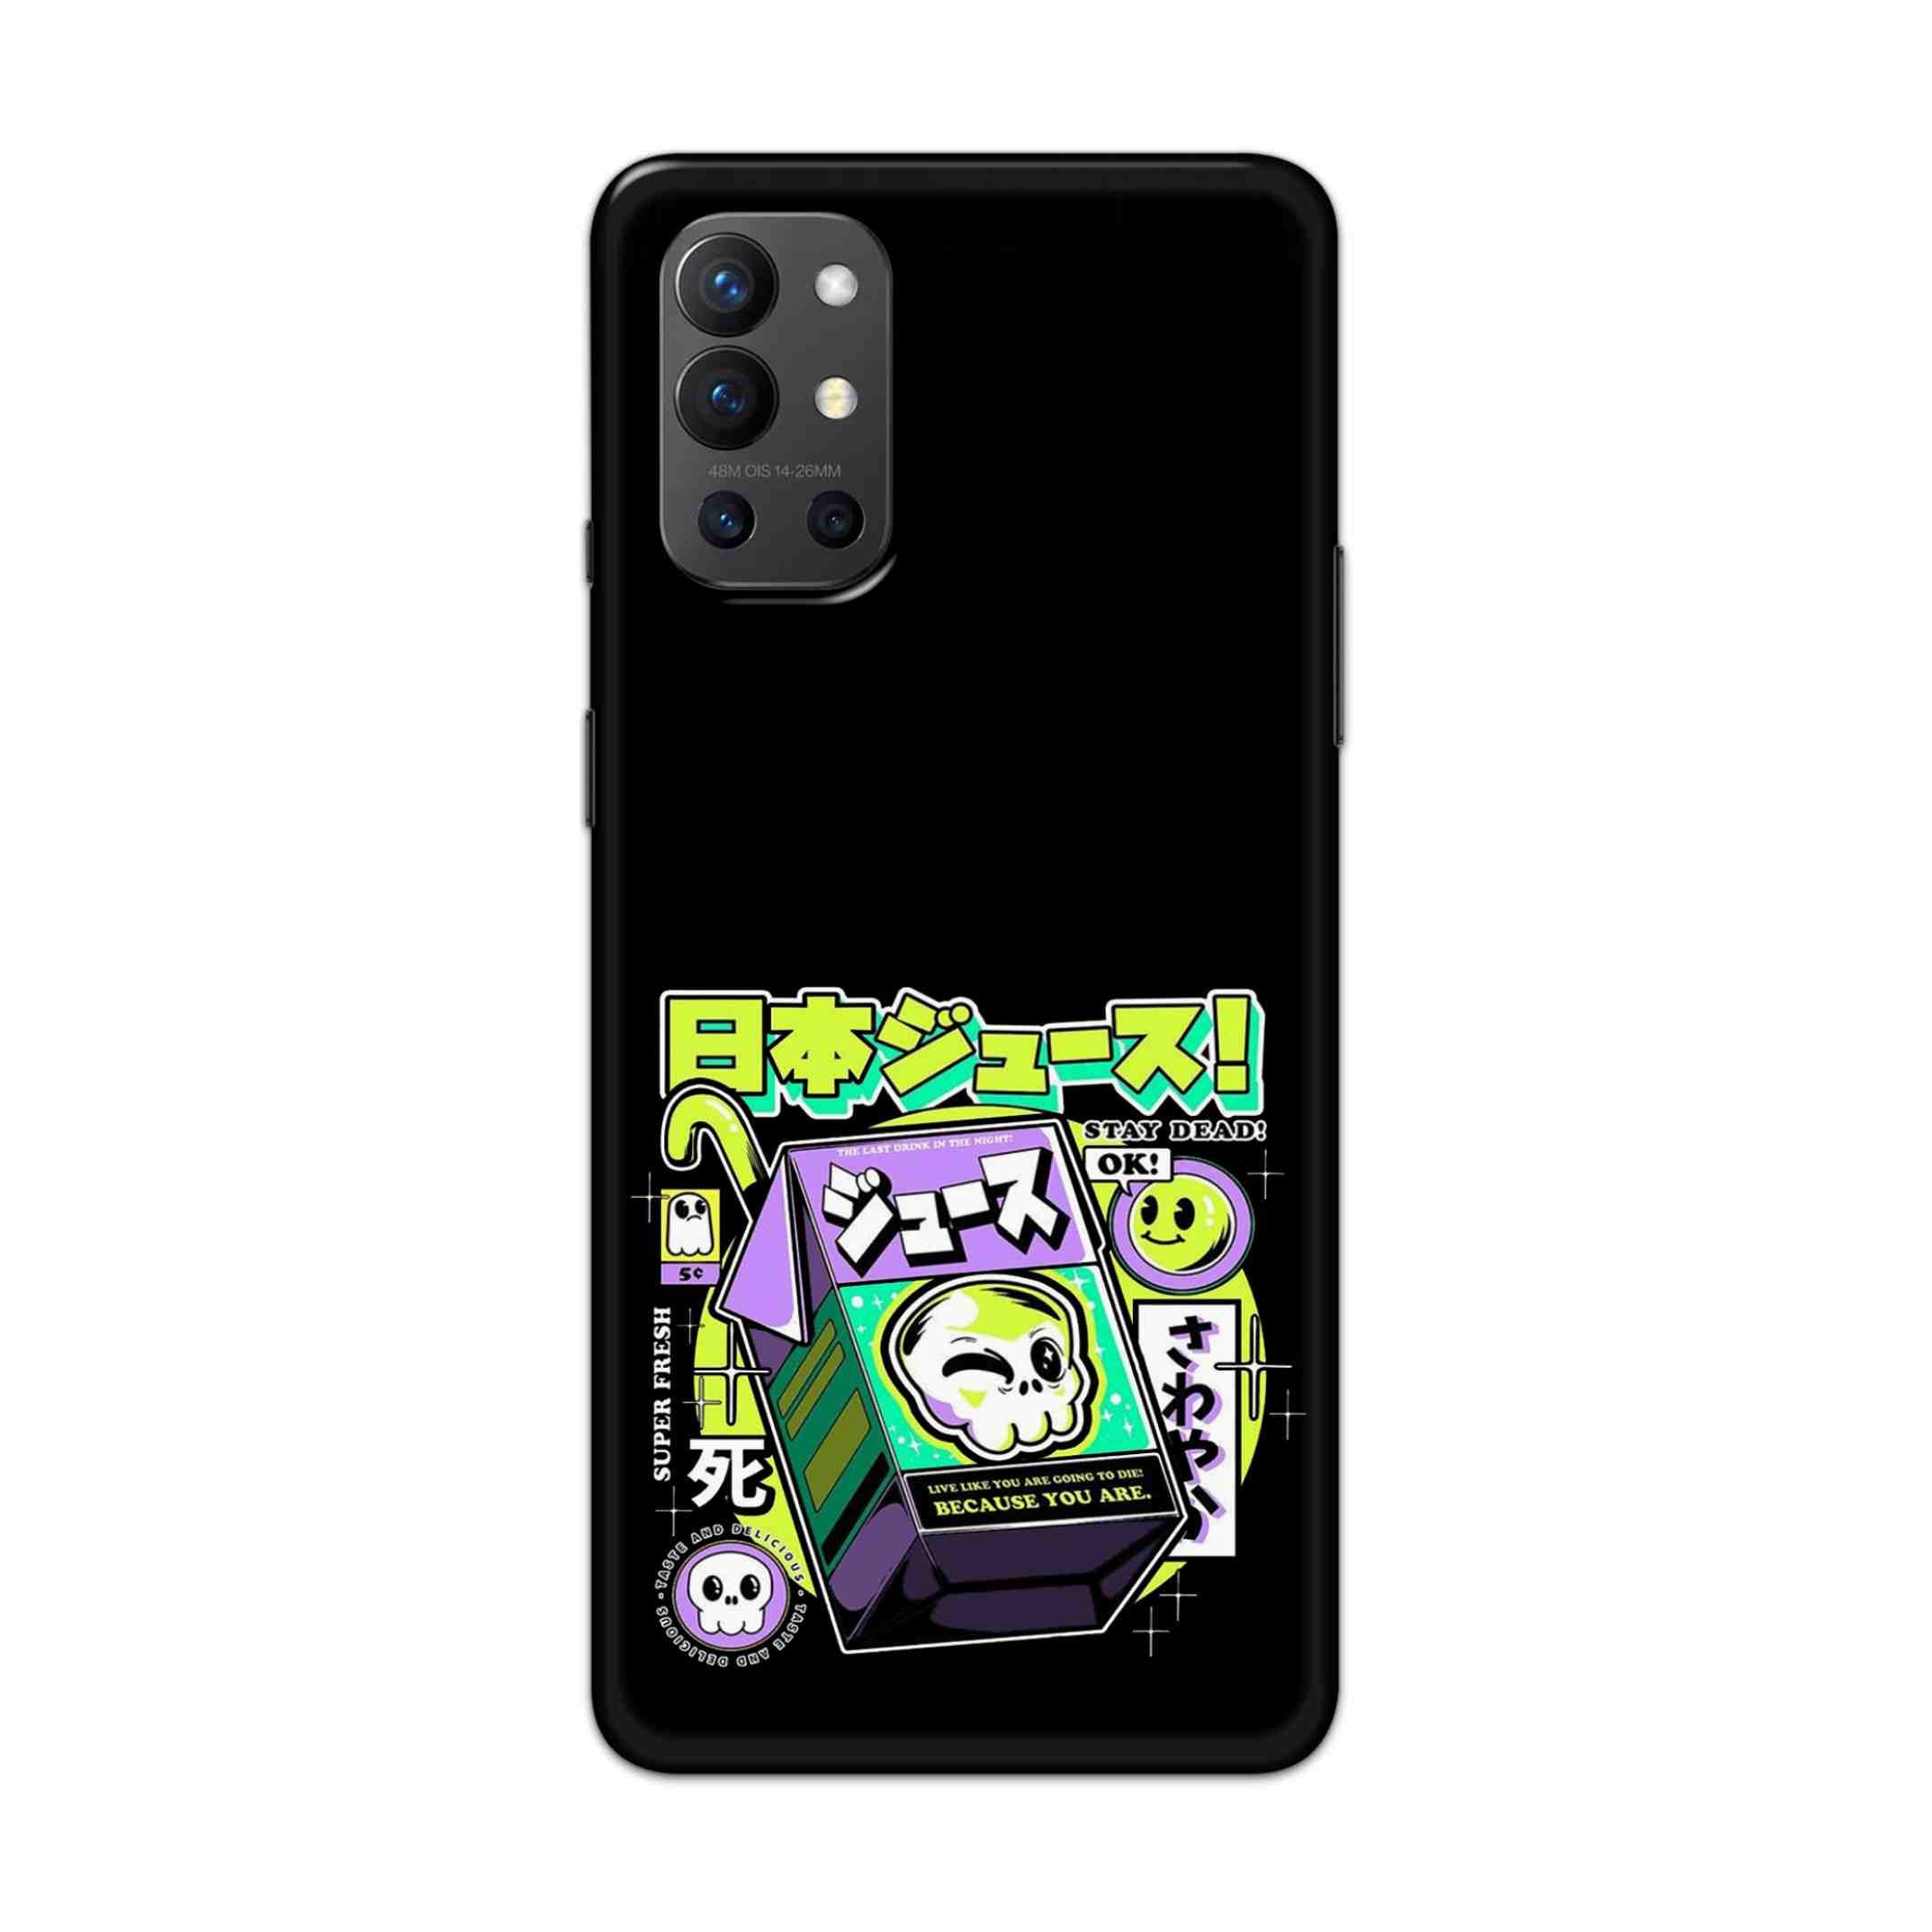 Buy Because You Are Hard Back Mobile Phone Case Cover For OnePlus 9R / 8T Online